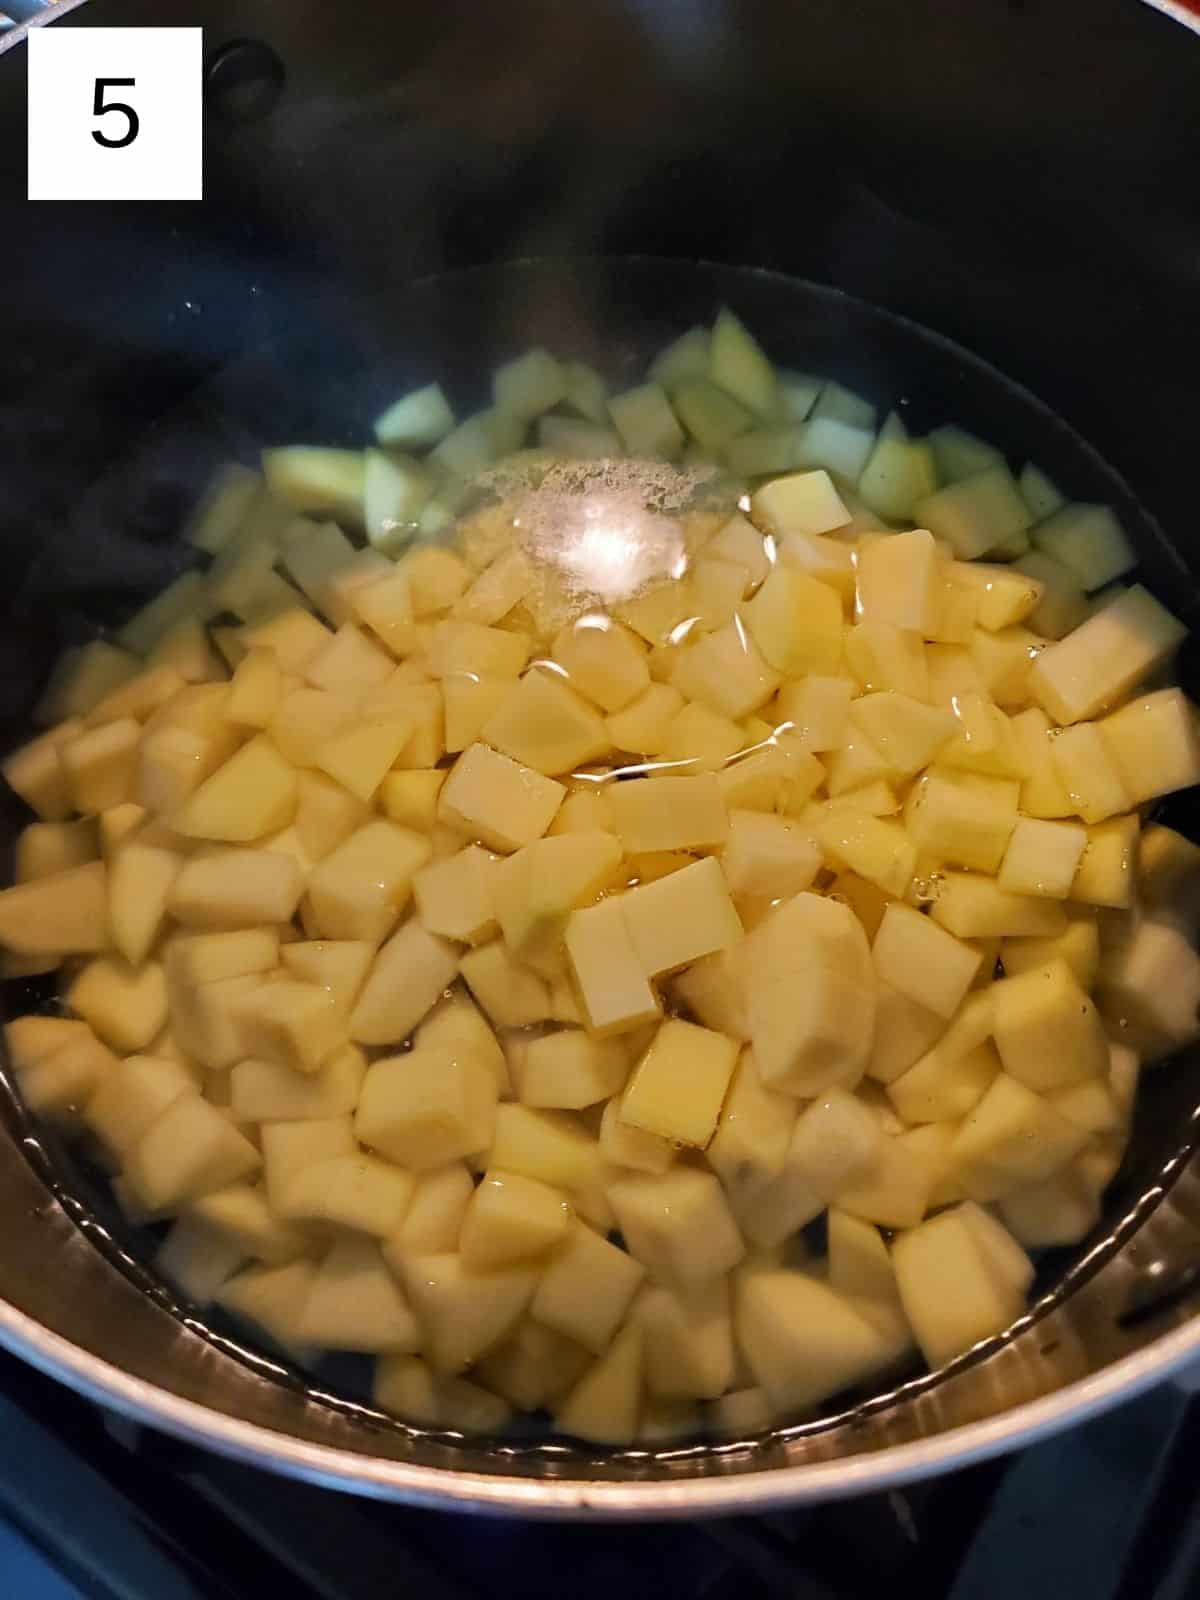 small potato cubes in a pot of salted water.